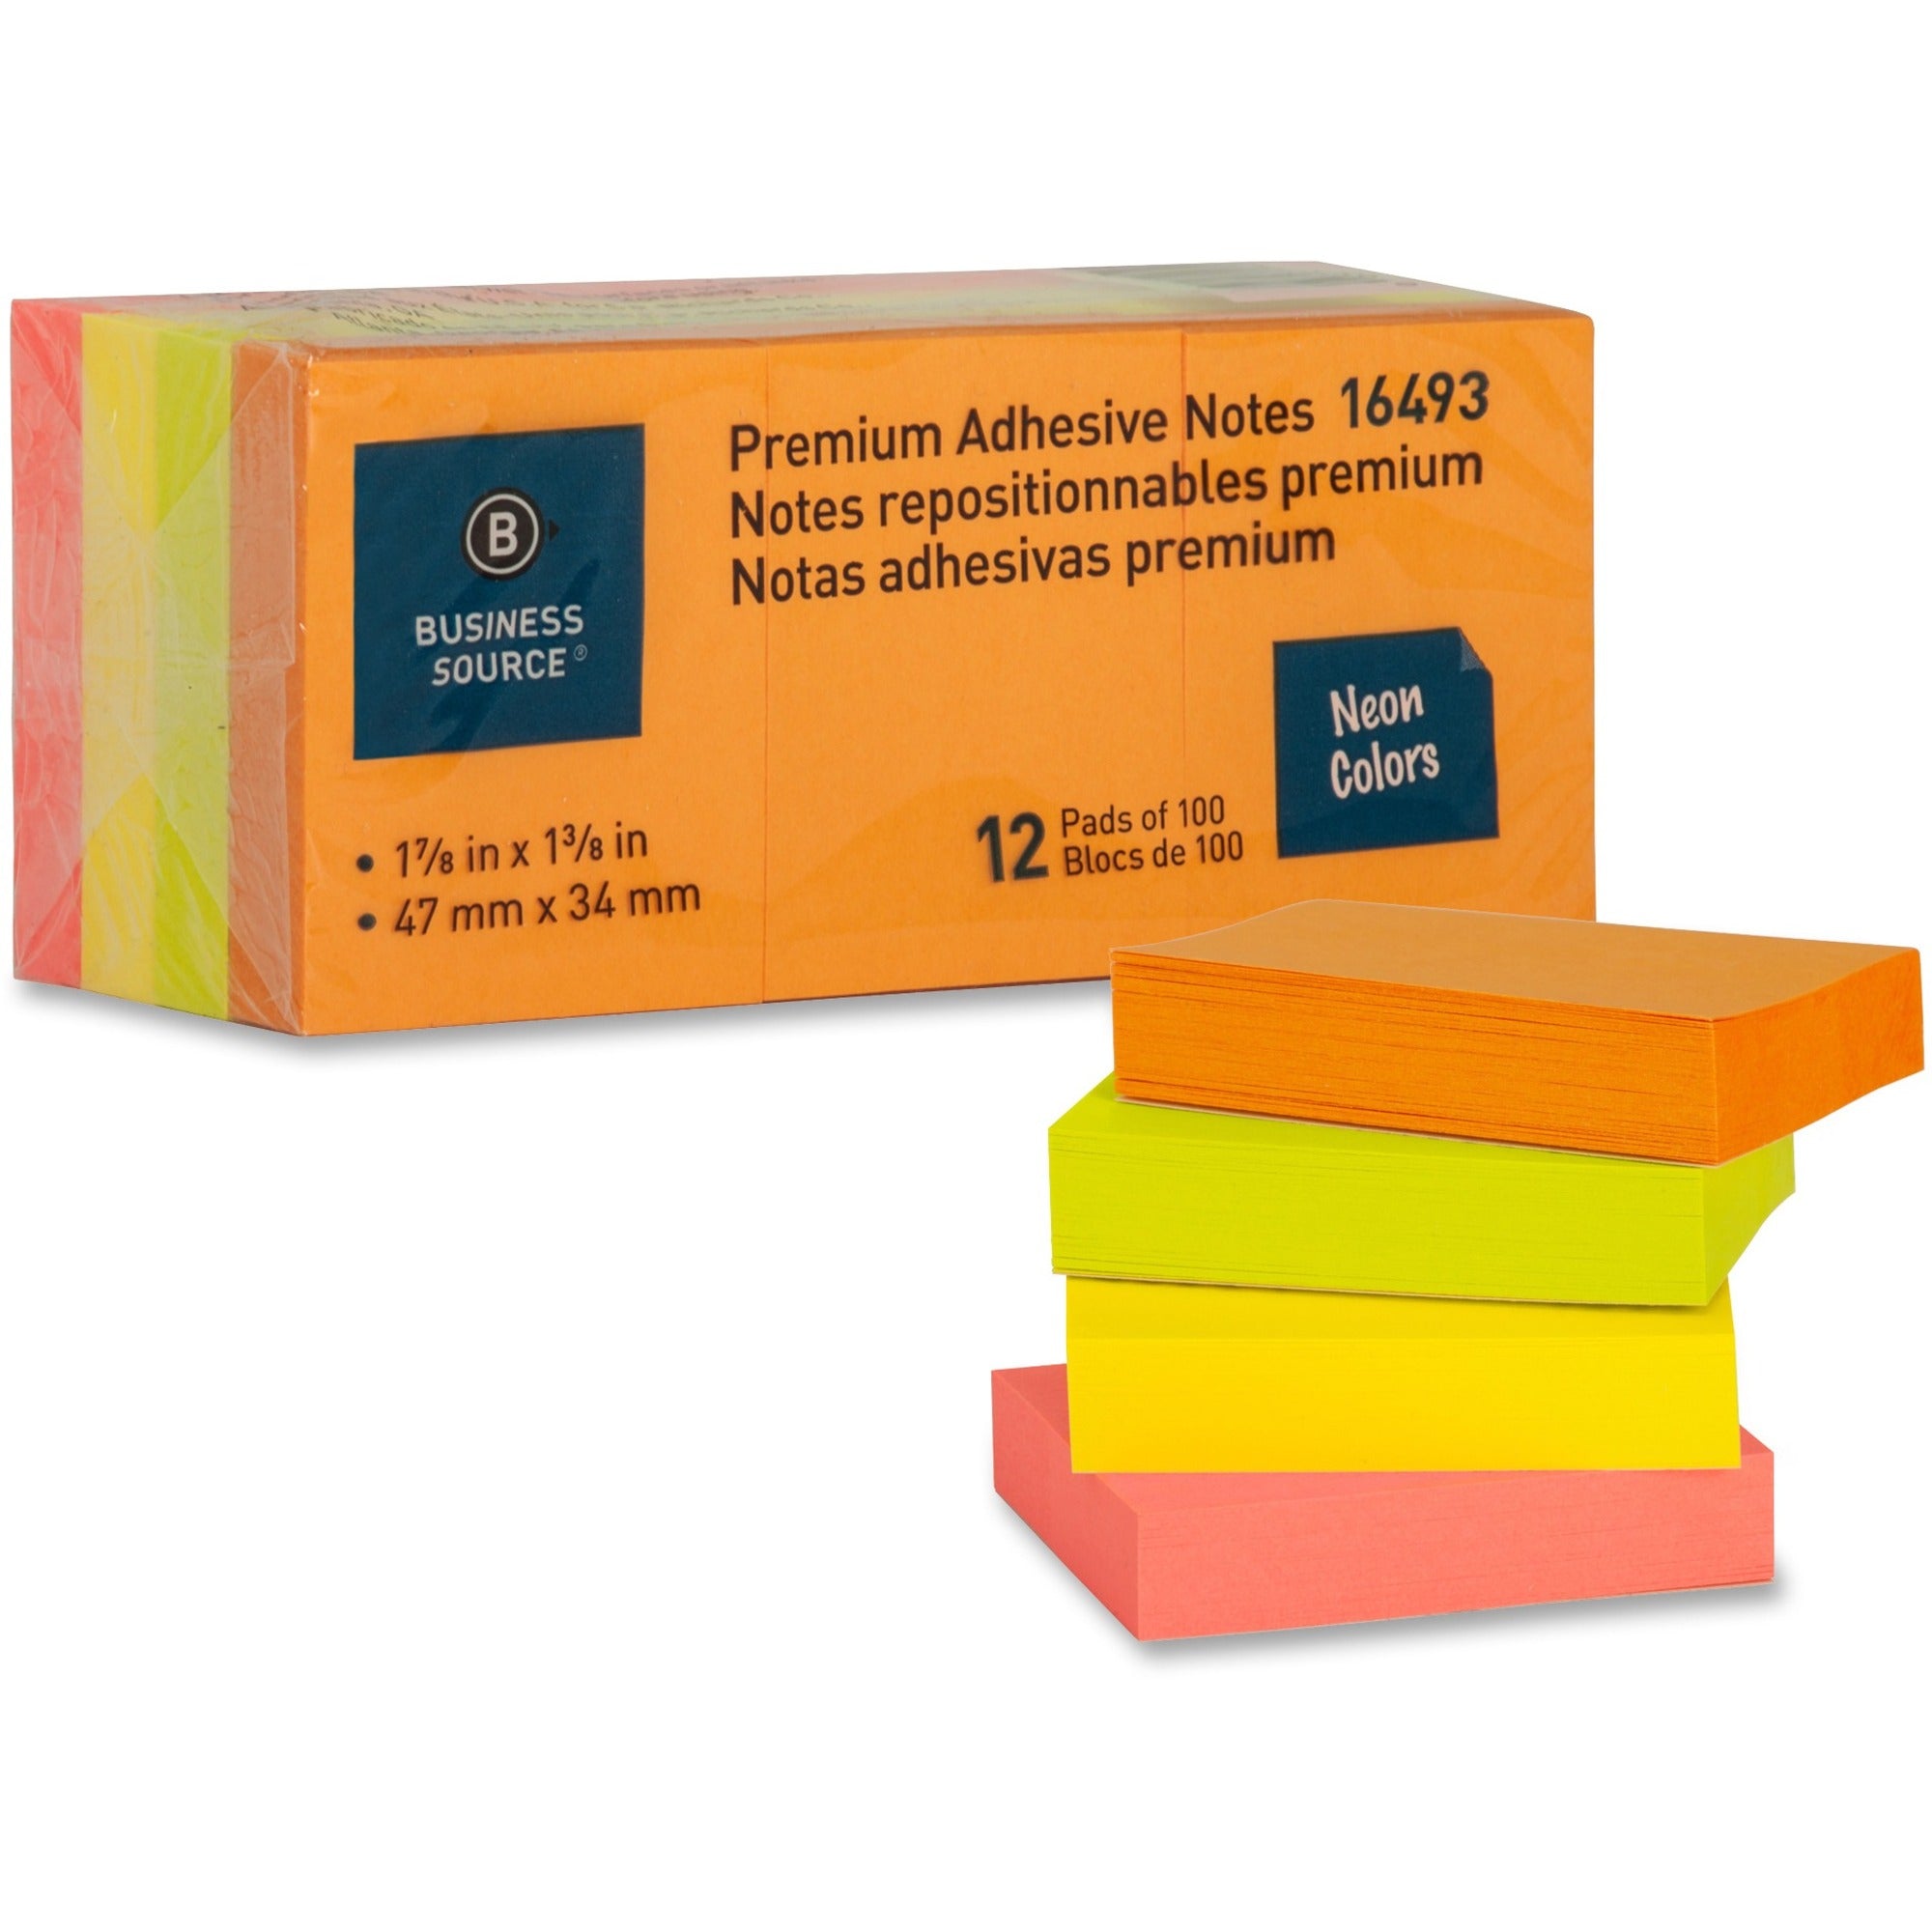 Business Source Premium Repostionable Adhesive Notes - 1.50" x 2" - Rectangle - Unruled - Neon - Self-adhesive, Repositionable, Solvent-free Adhesive - 12 / Pack - 